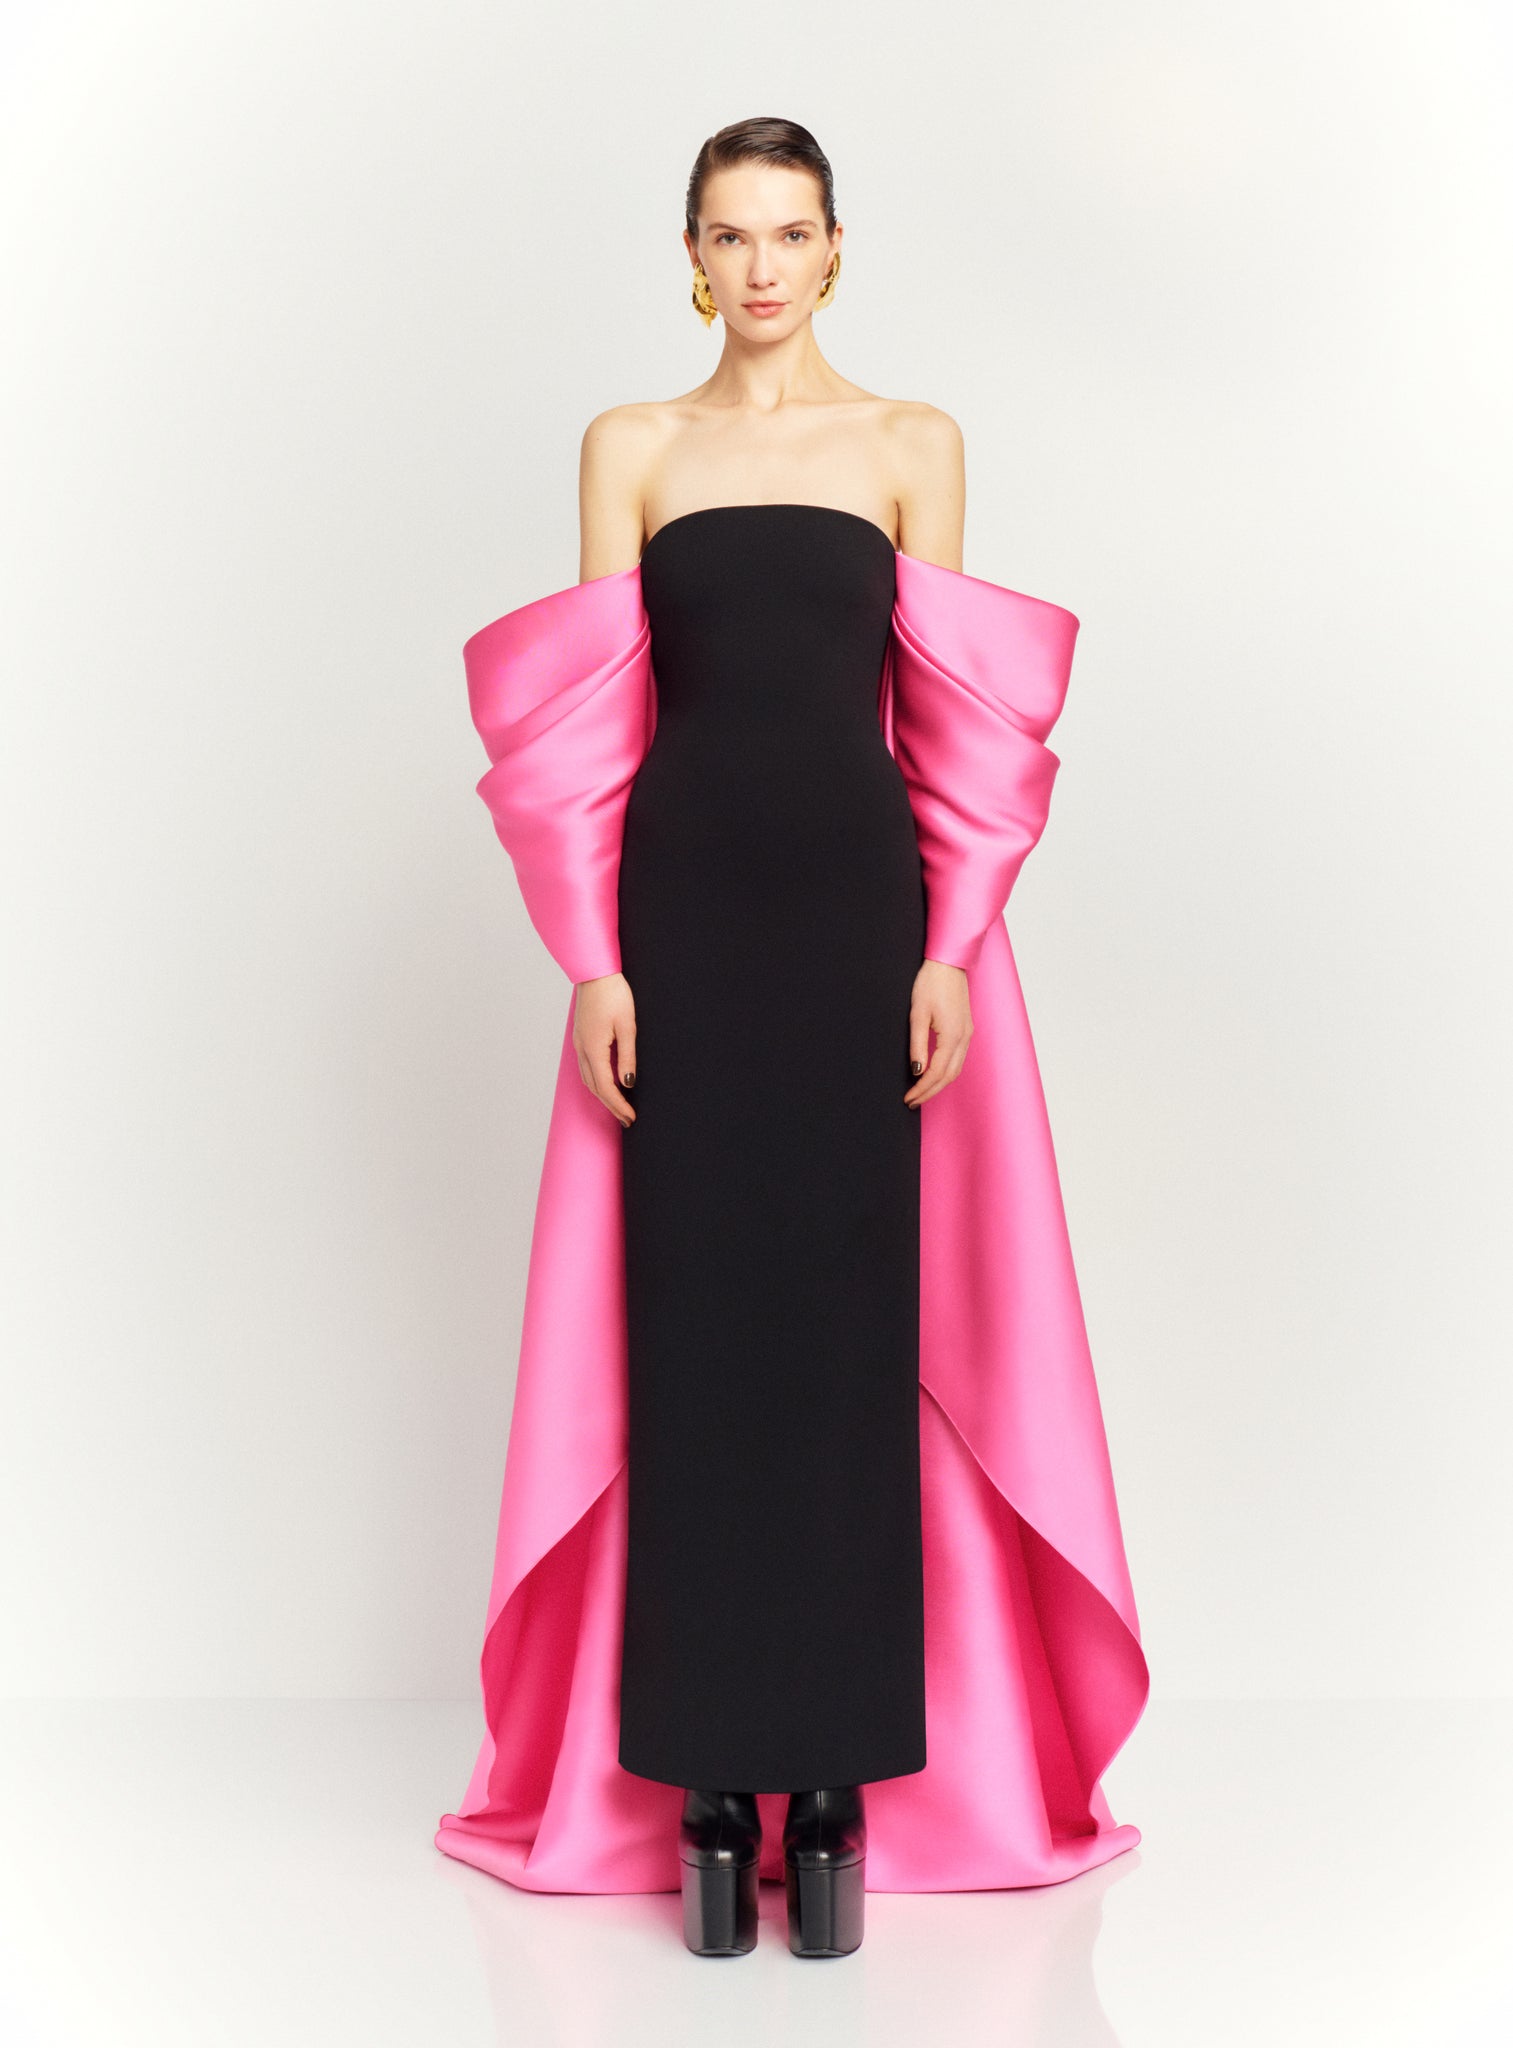 The Kyla Maxi Dress in Light Pink and Black